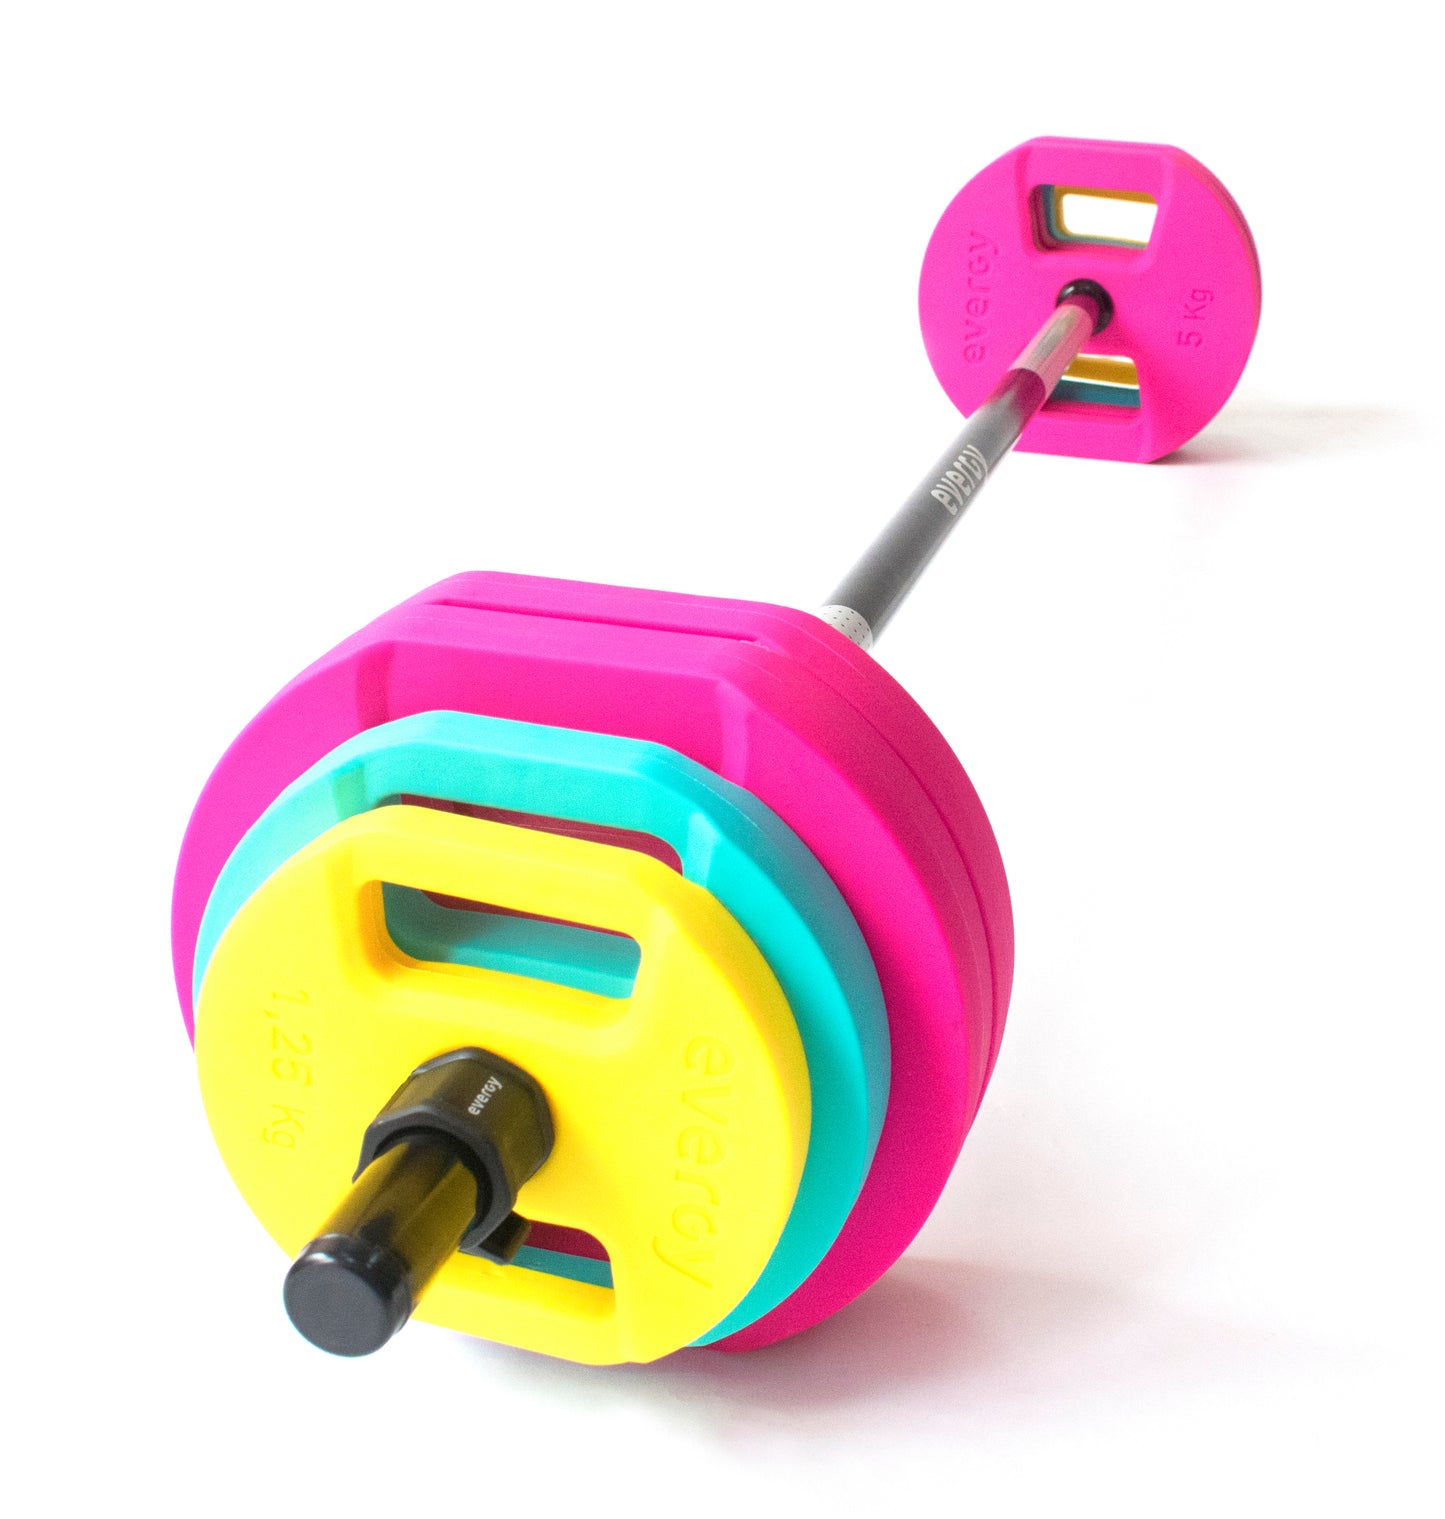 Everpump 30 kg set (Weight plates, barbell and collars)